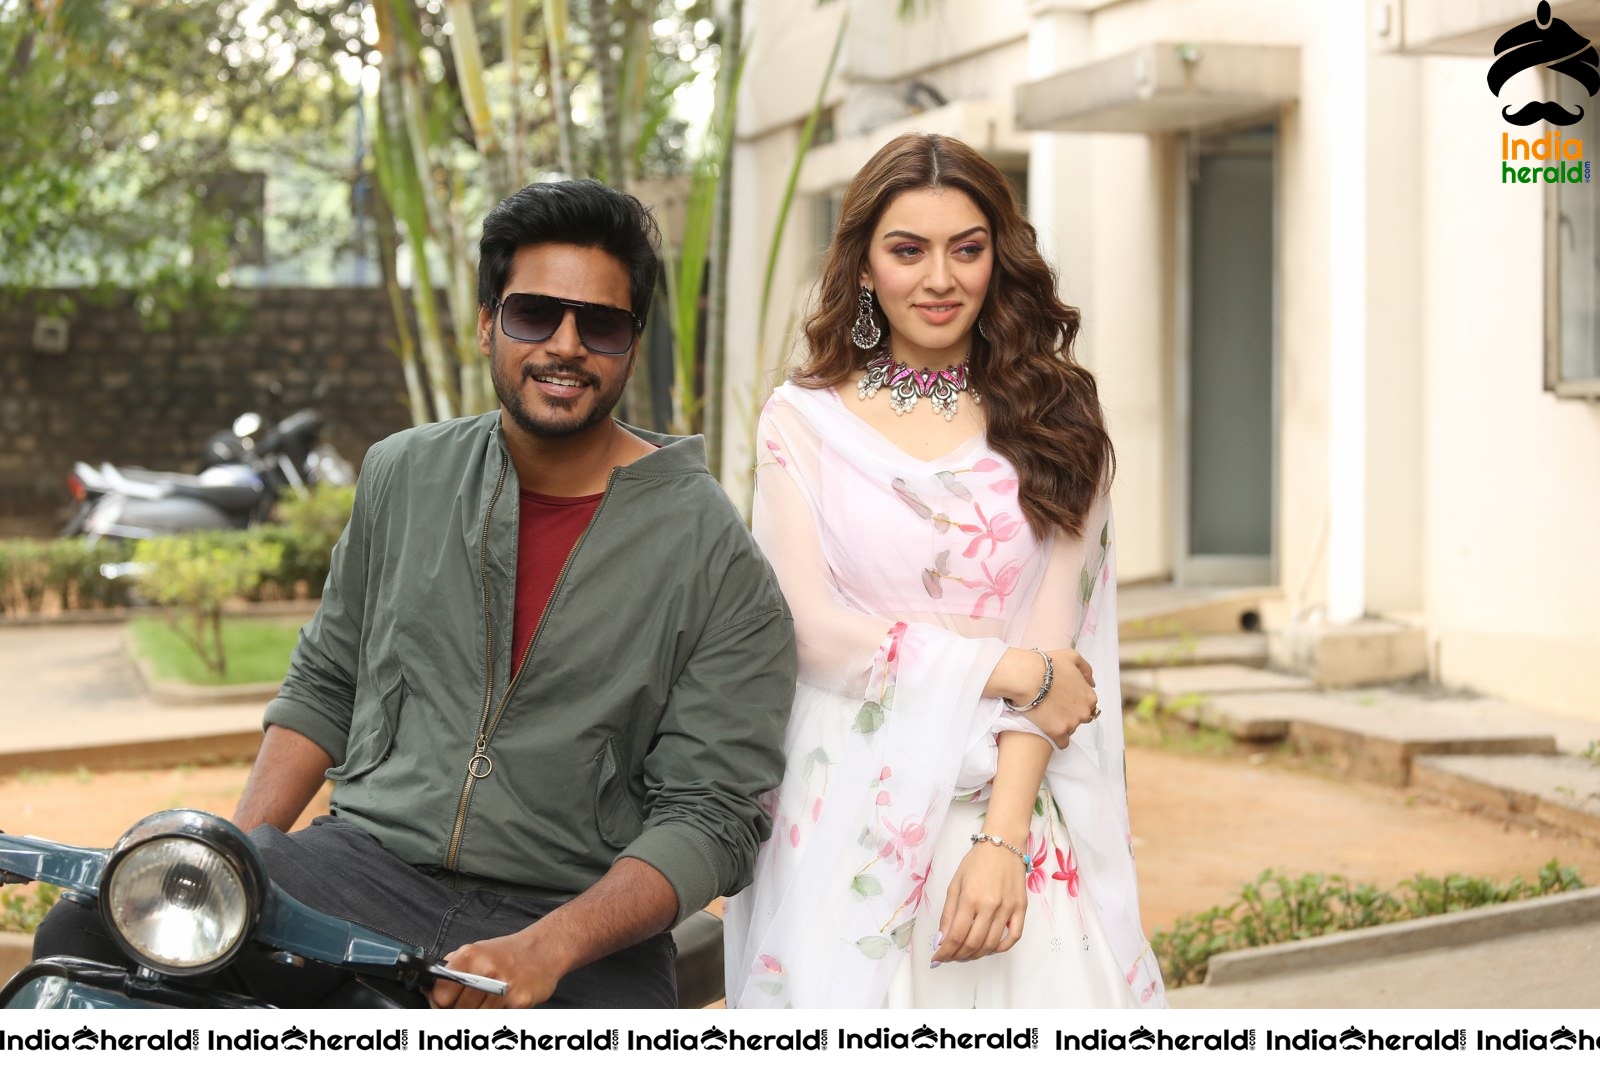 Actor Sundeep Kishan takes Photos along with Hansika sitting behind him in a Scooter Set 2